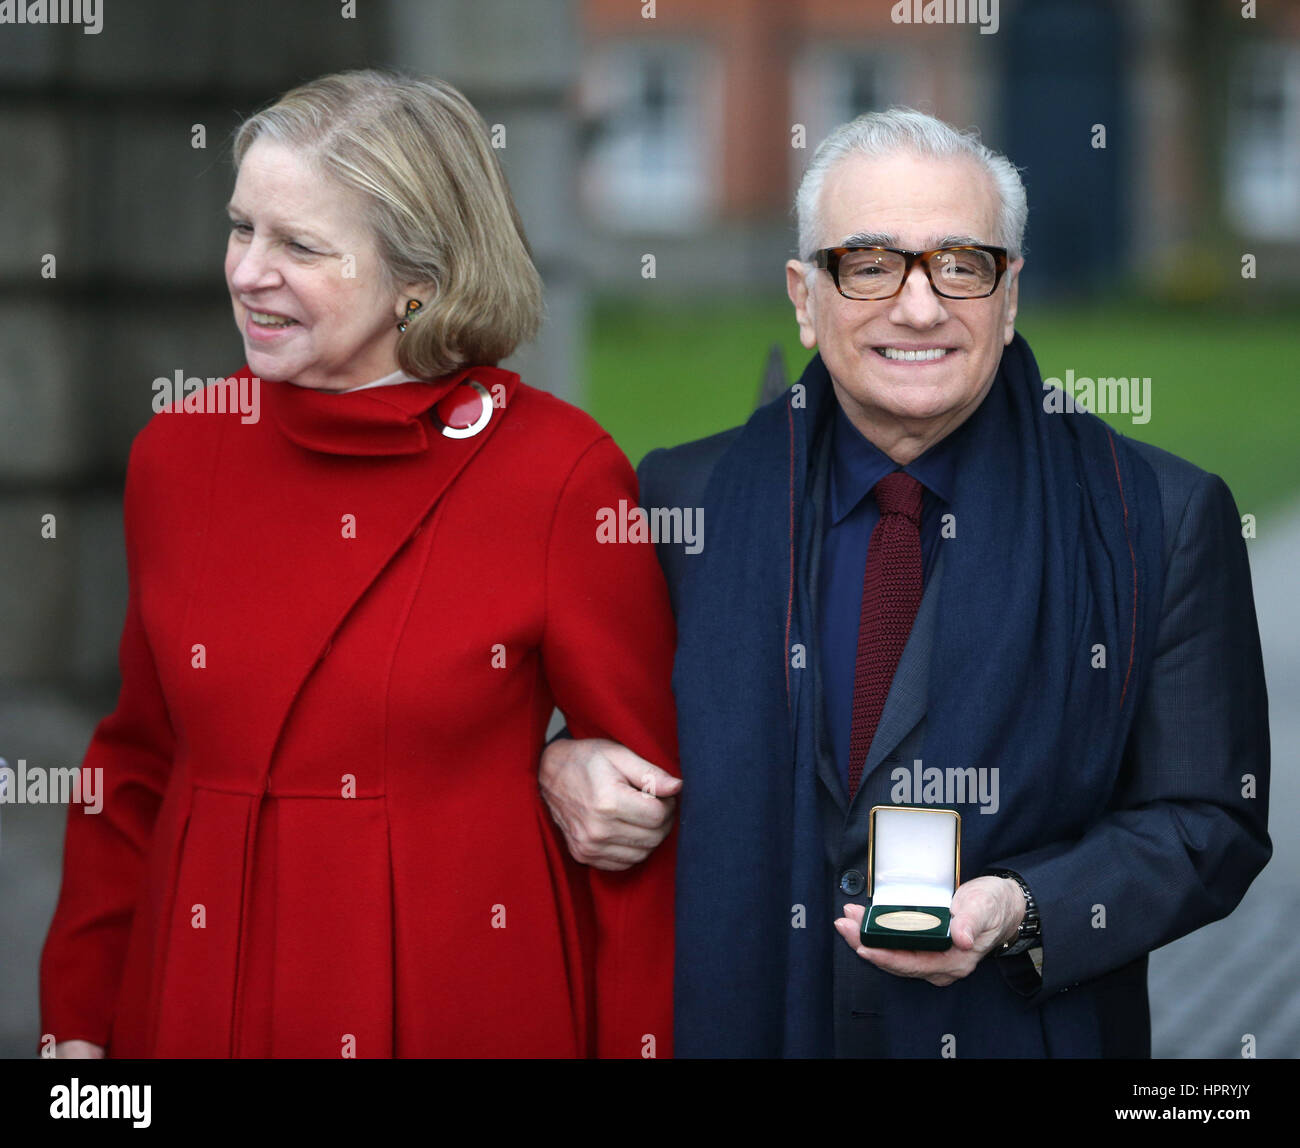 Film director Martin Scorsese (right), with his wife Helen Morris, holds a gold medal awarded to him by students of Trinity College's debating society, the Philosophical Society at Trinity College in Dublin. Stock Photo